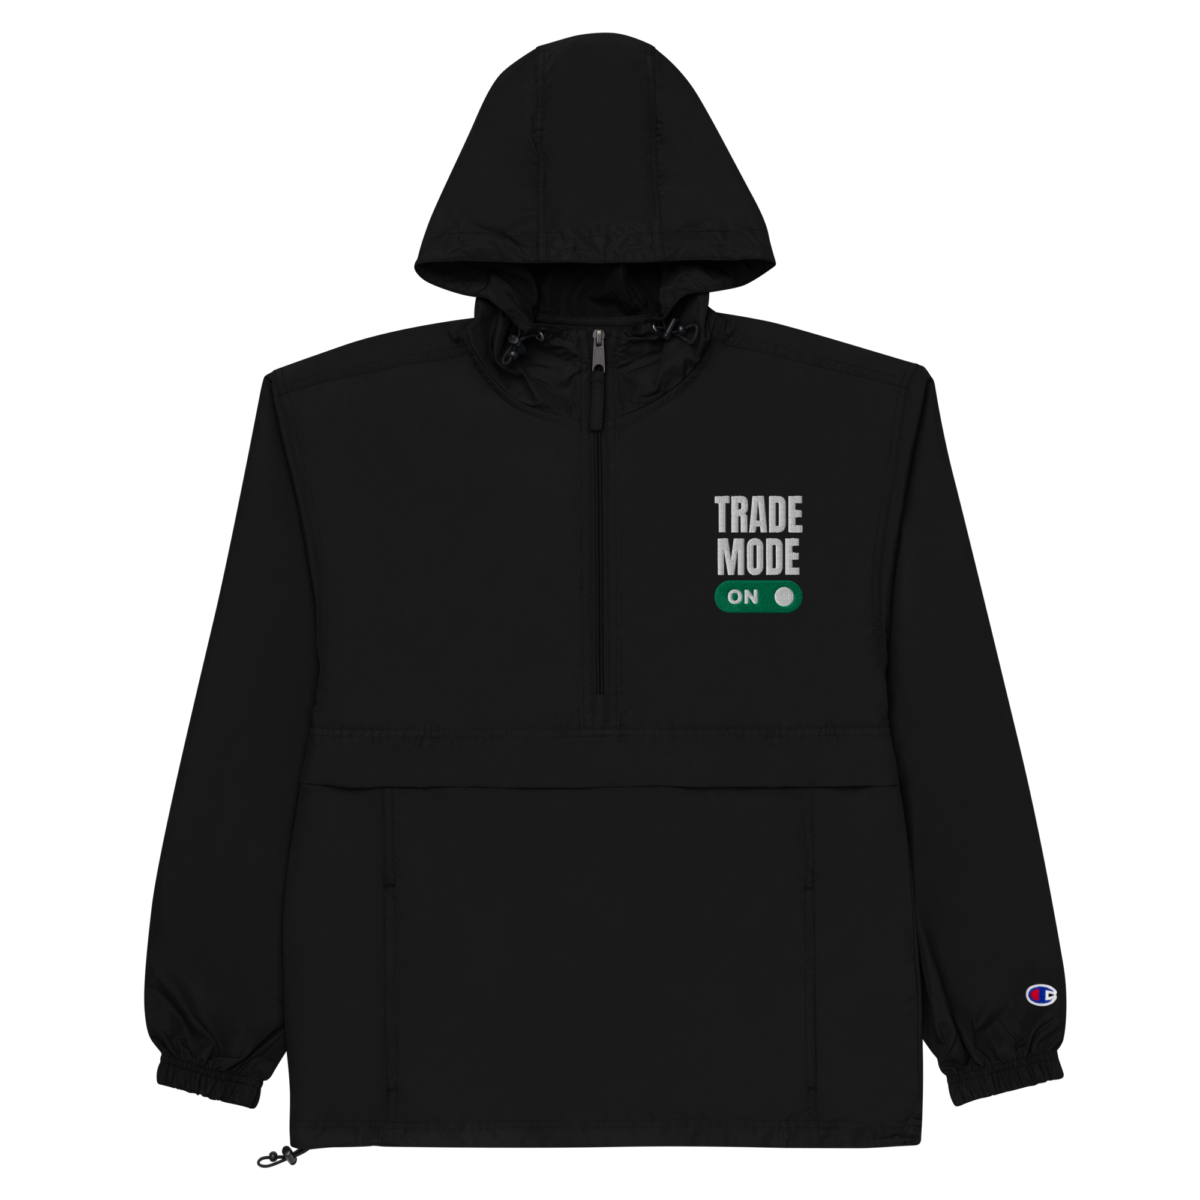 embroidered champion packable jacket black front 631f573c39ad3 - Trade Mode: On Champion Packable Jacket